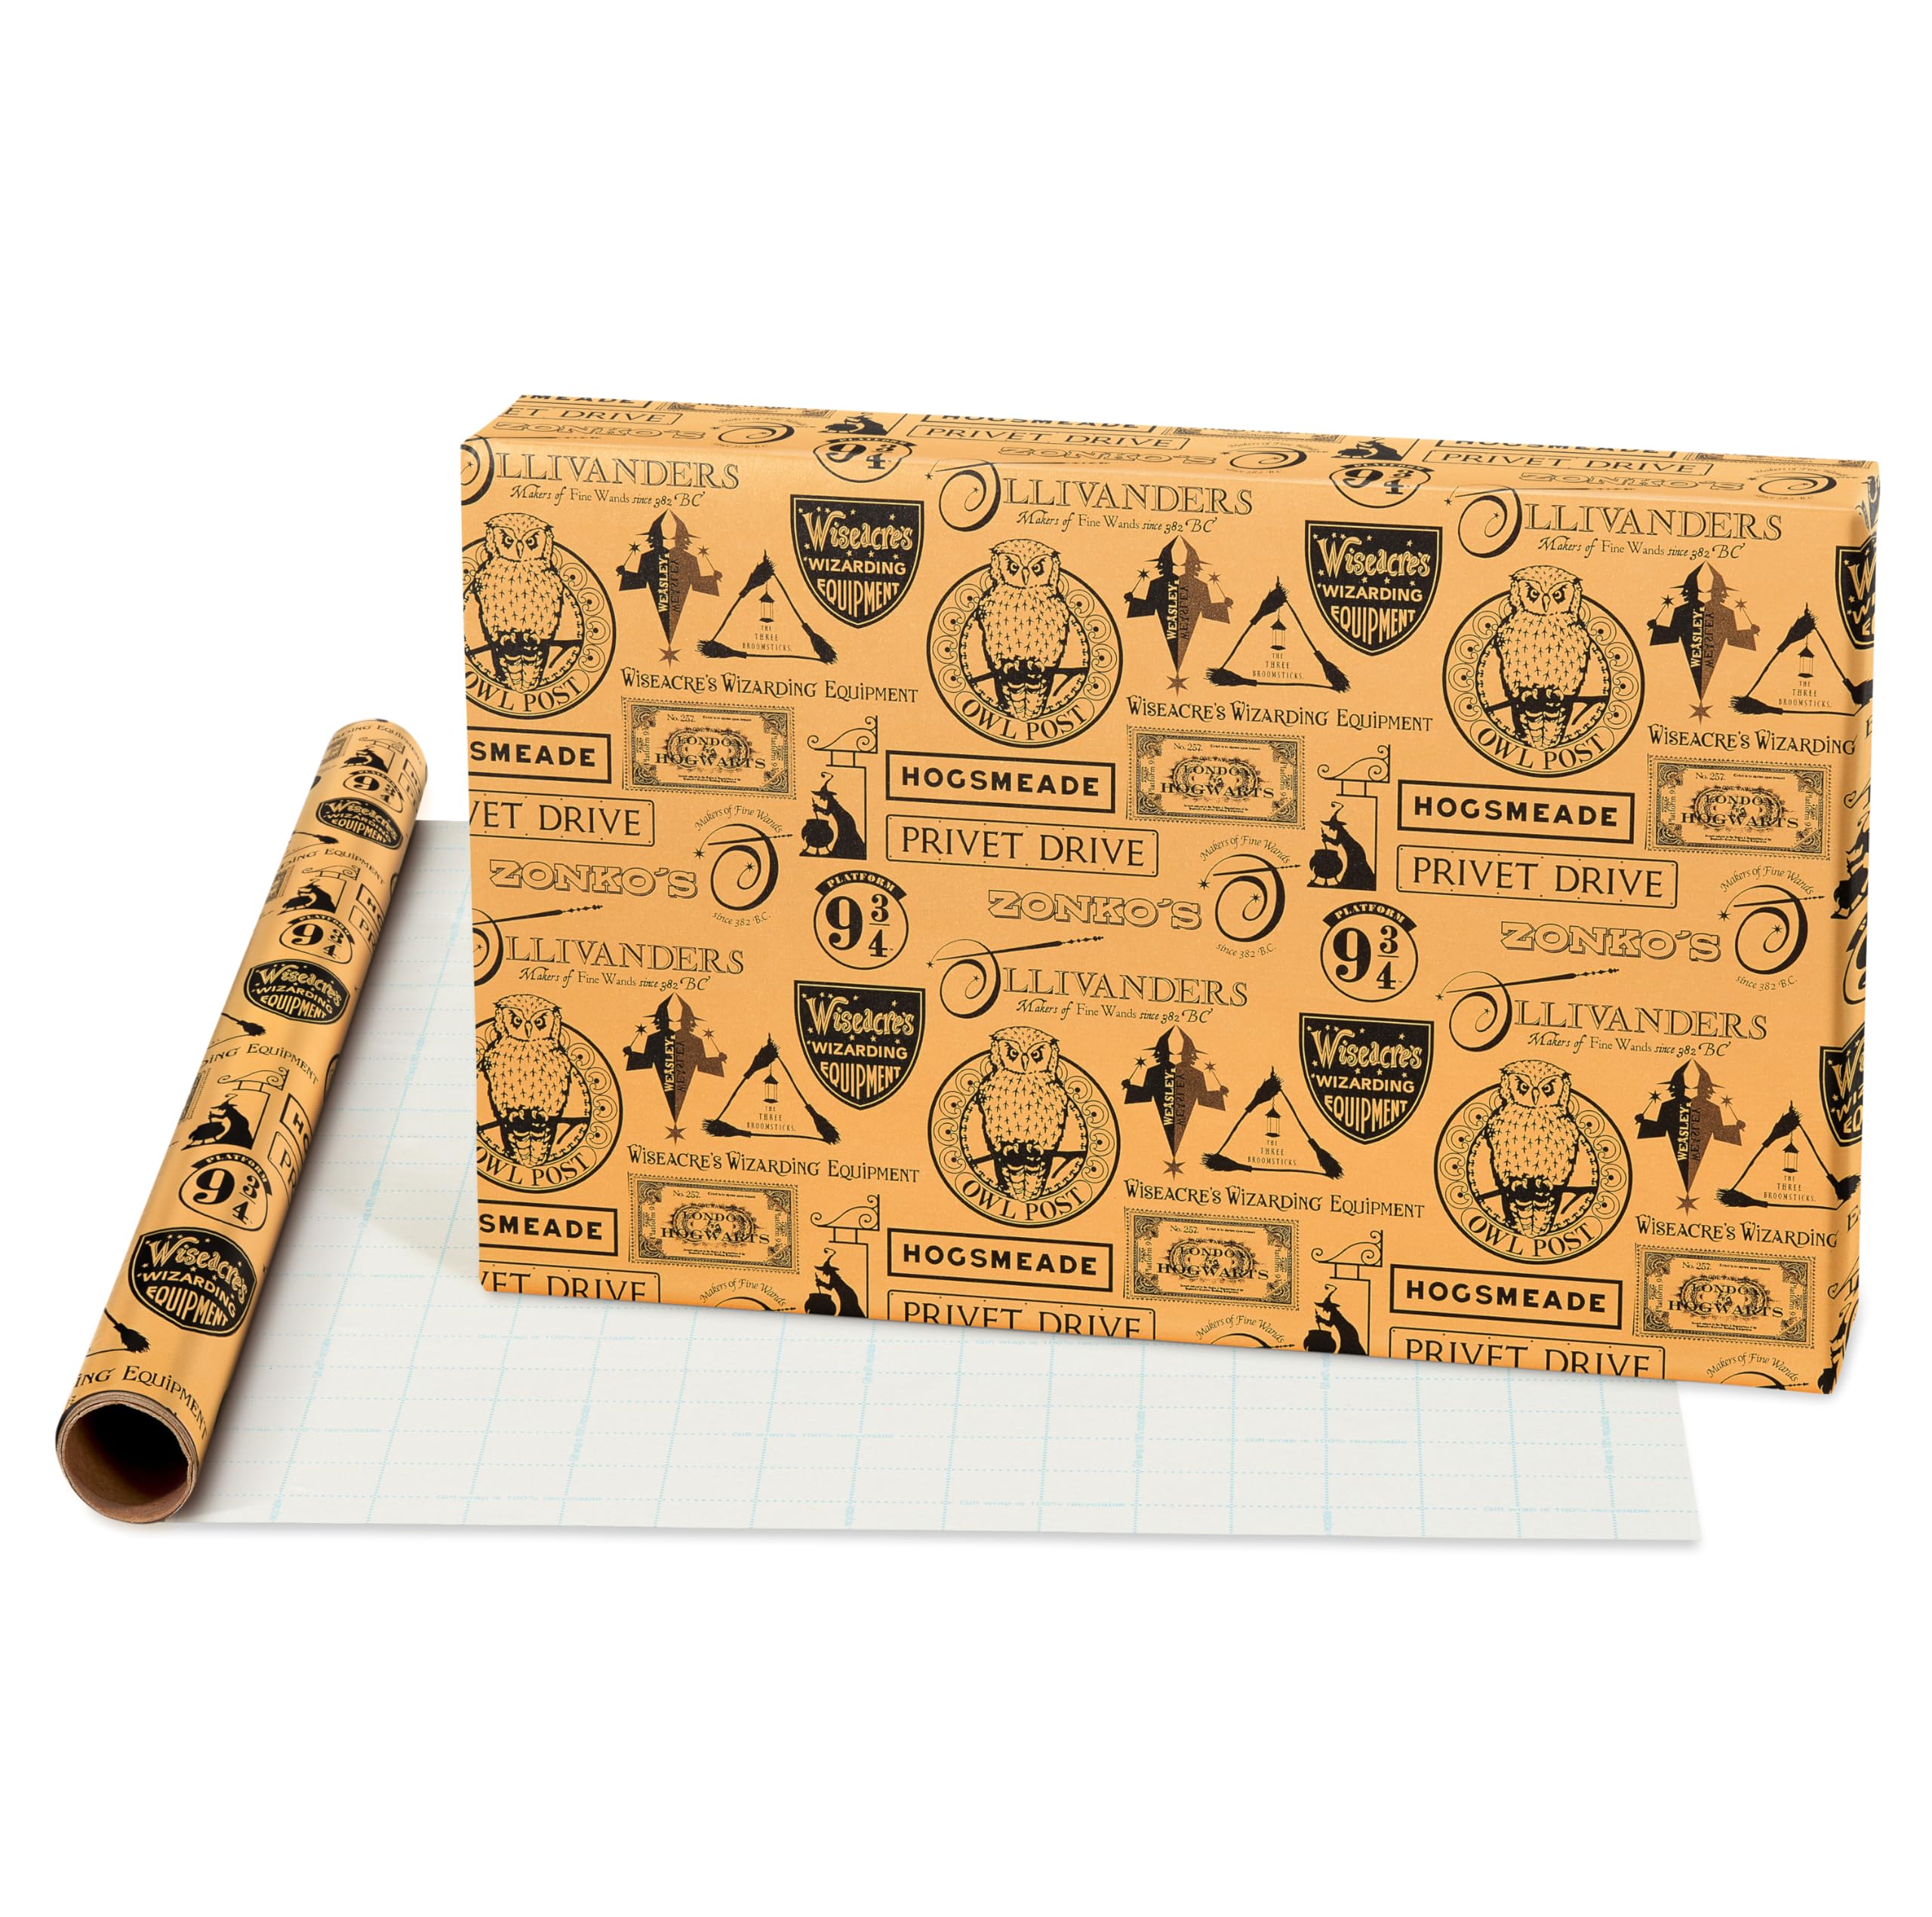 American Greetings 105 sq. ft. Harry Potter Wrapping Paper Set with Gridlines for Birthdays, Graduations and All Occasions, Hogwarts House Crests, Gryffindor Robe and Marauders Map (3 Rolls, 30 in. x 14 ft. each)